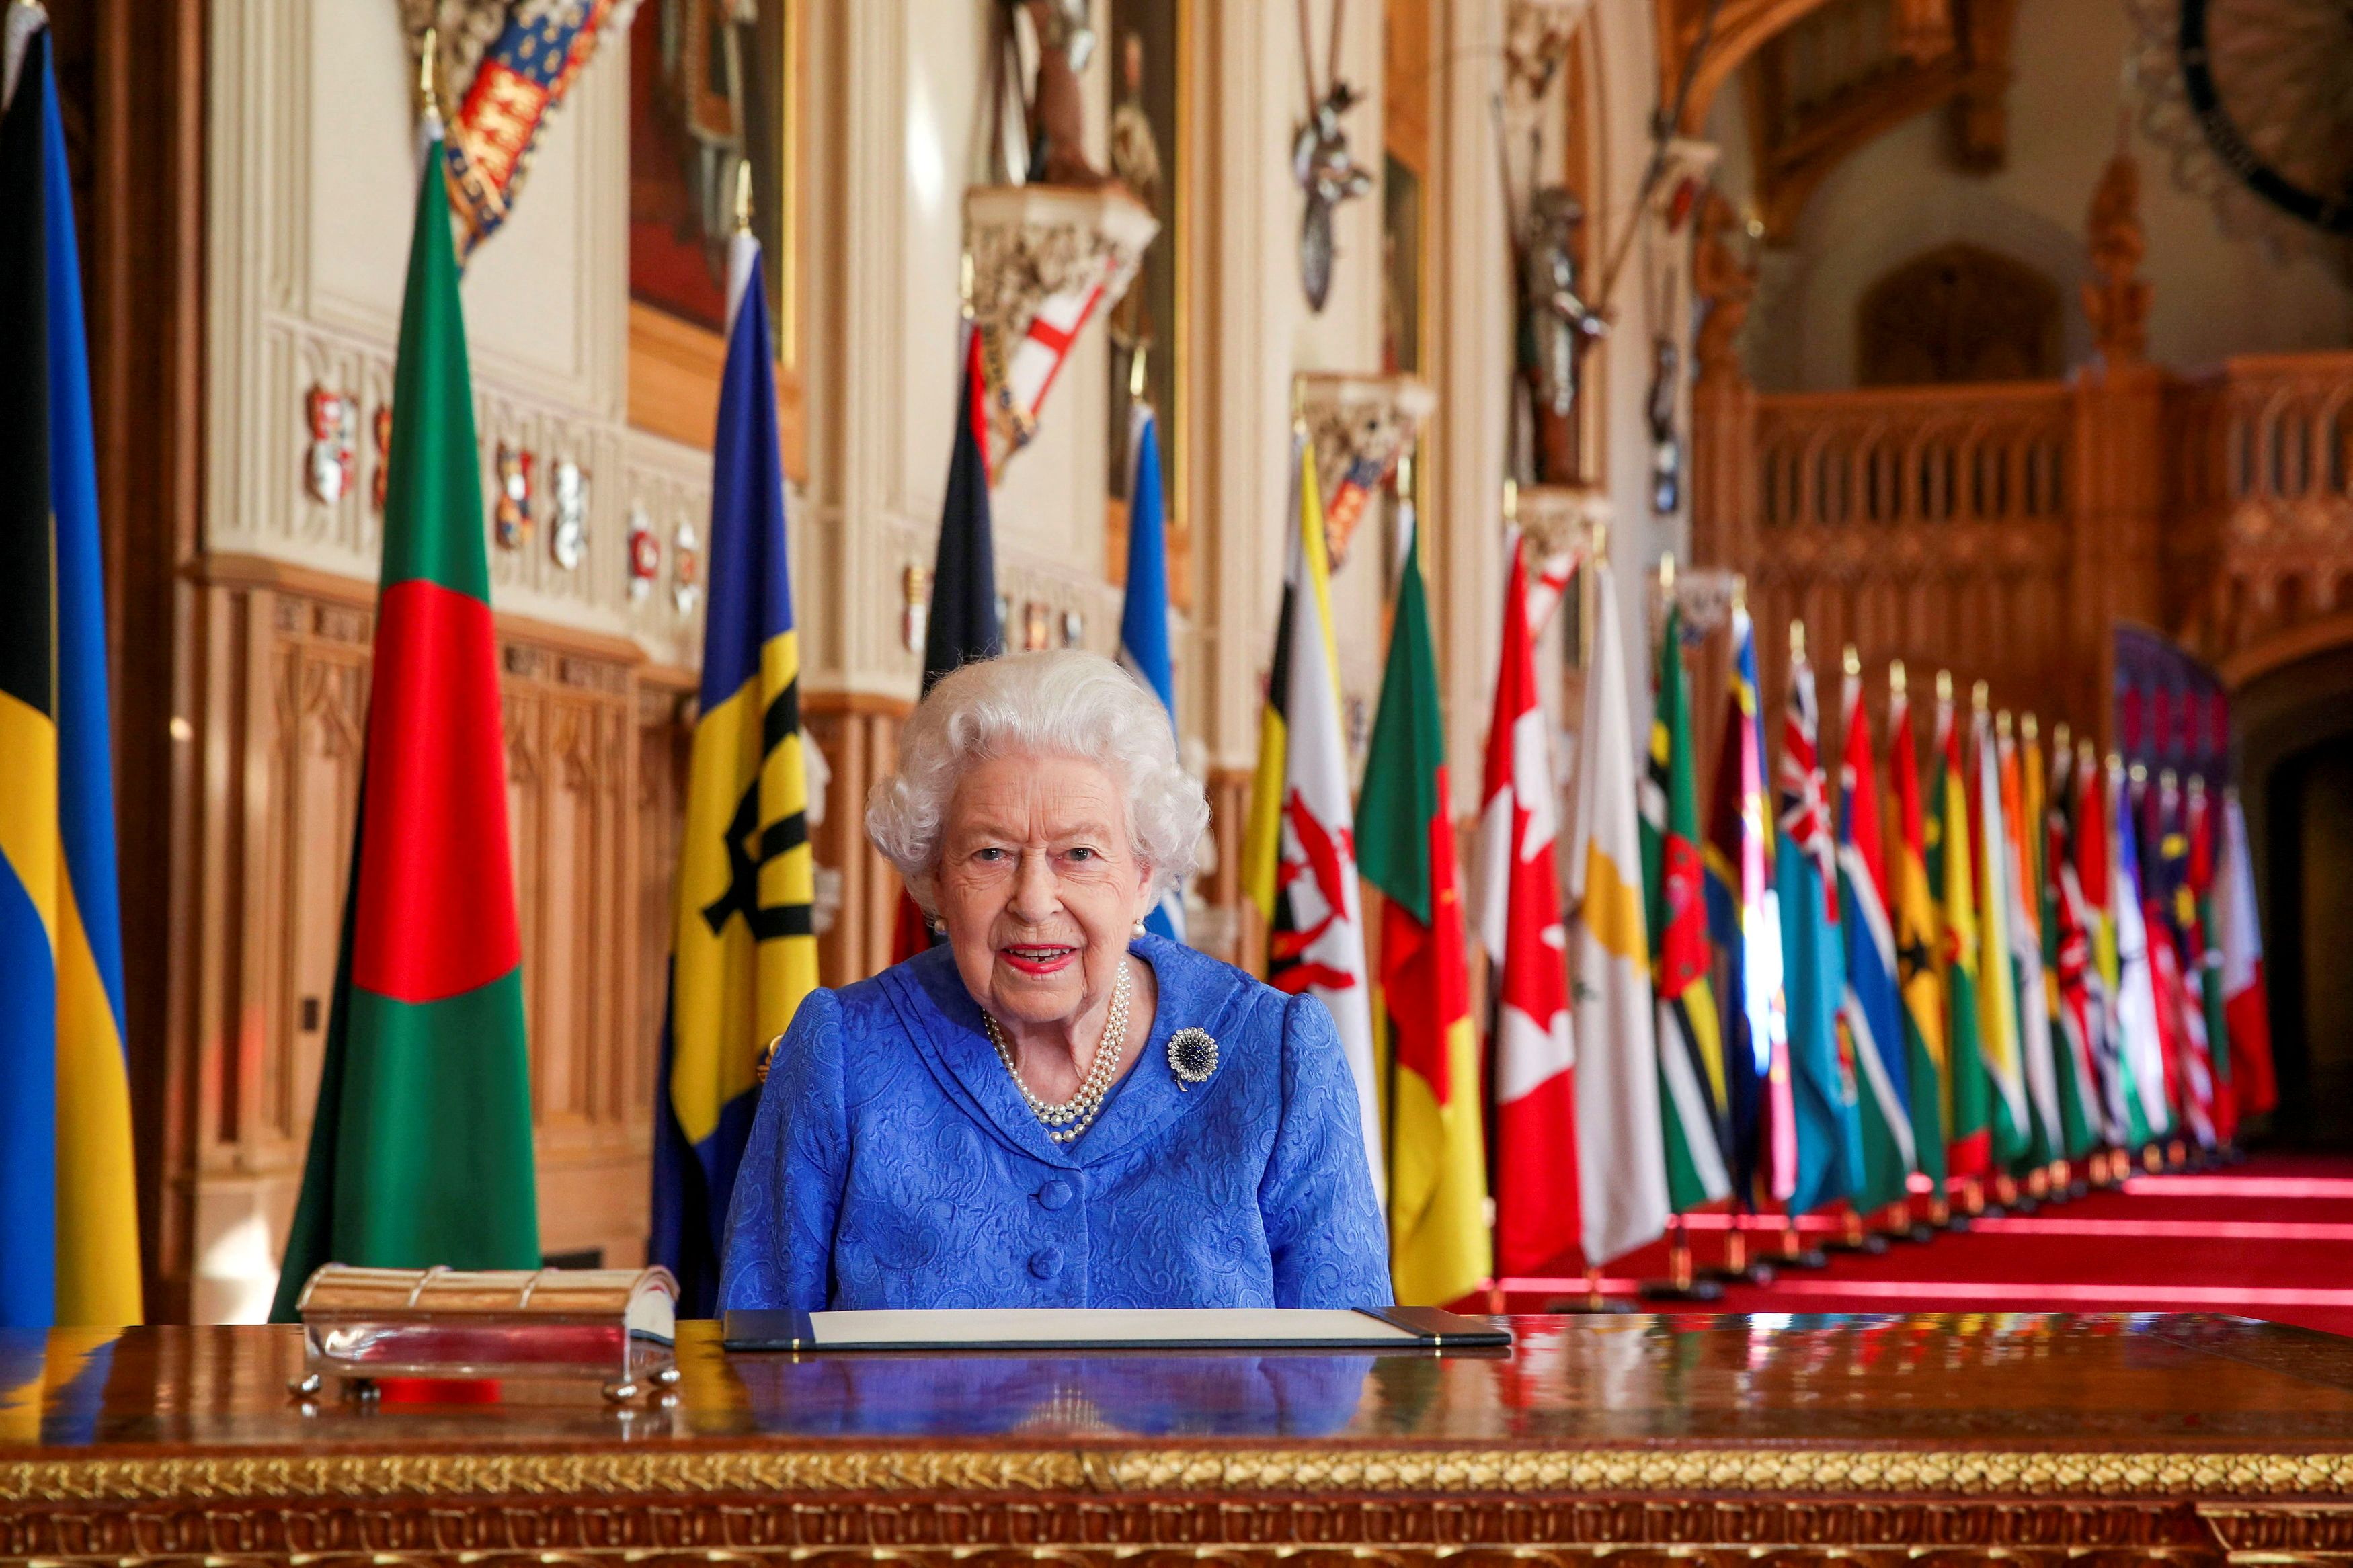 Britain's Queen Elizabeth II signs her annual Commonwealth Day message at Windsor Castle, Britain